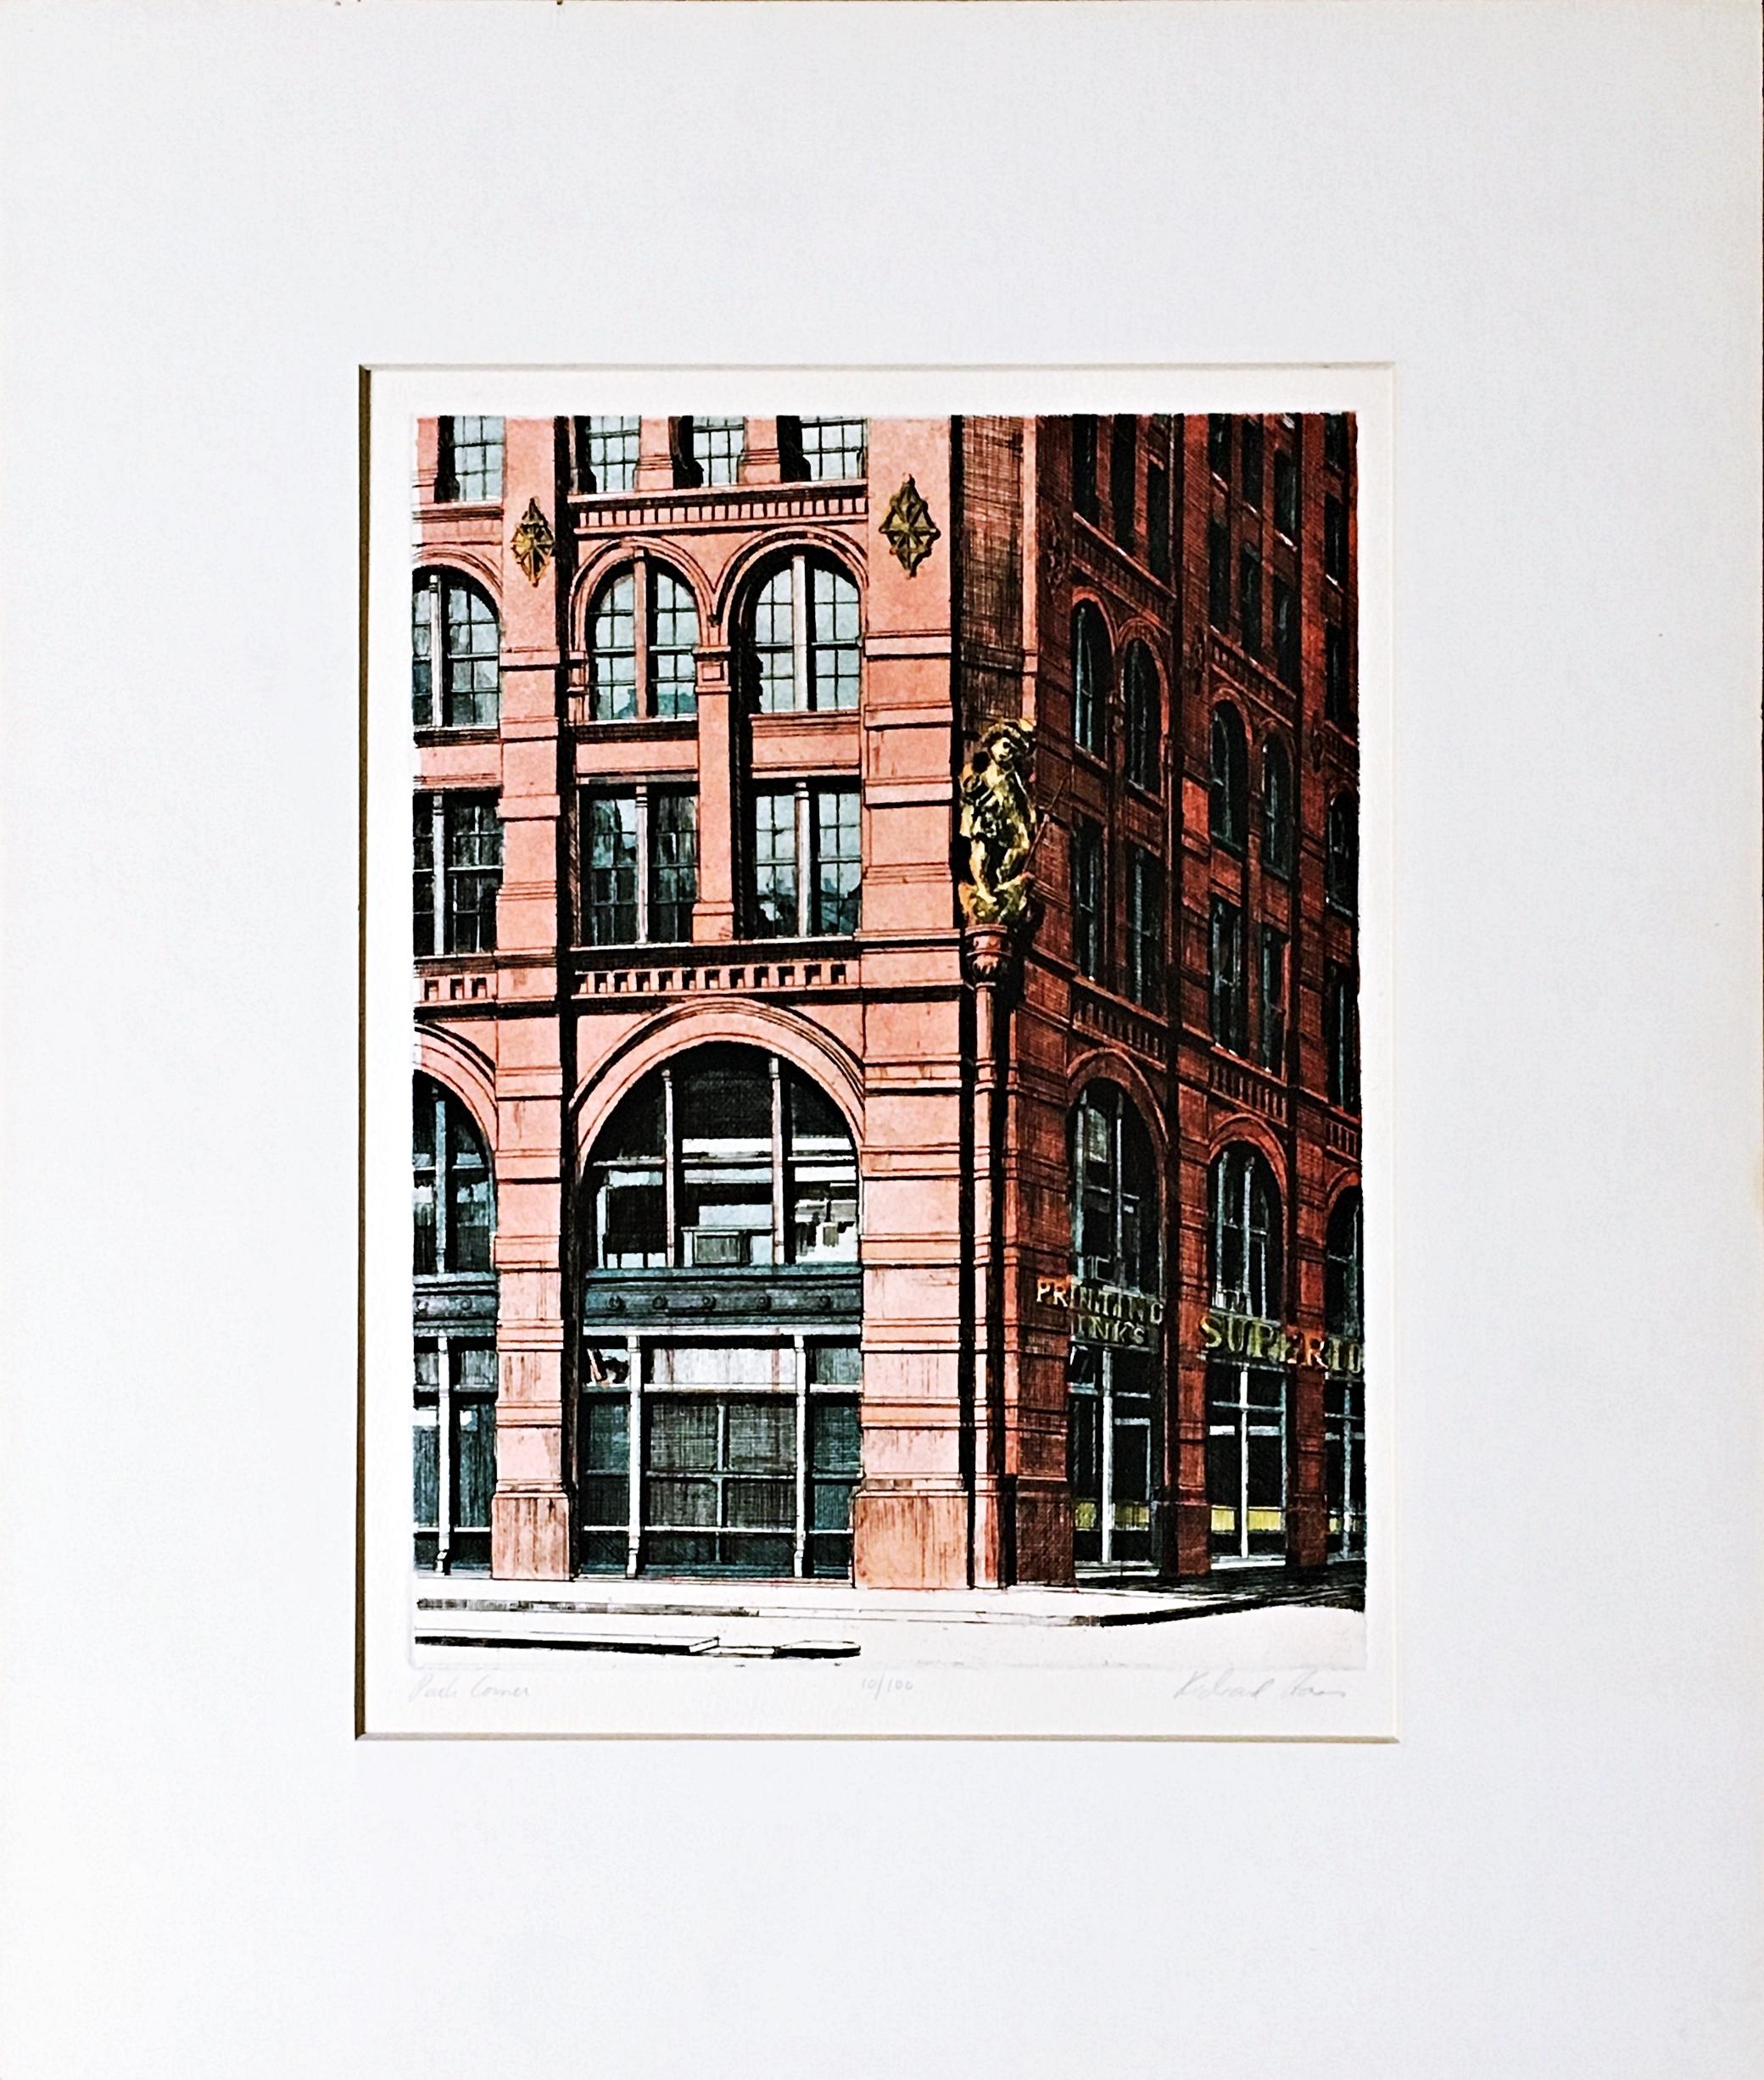 Puck Corner, SOHO, New York signed & numbered 10/100 by top architectural artist - Print by Richard Haas